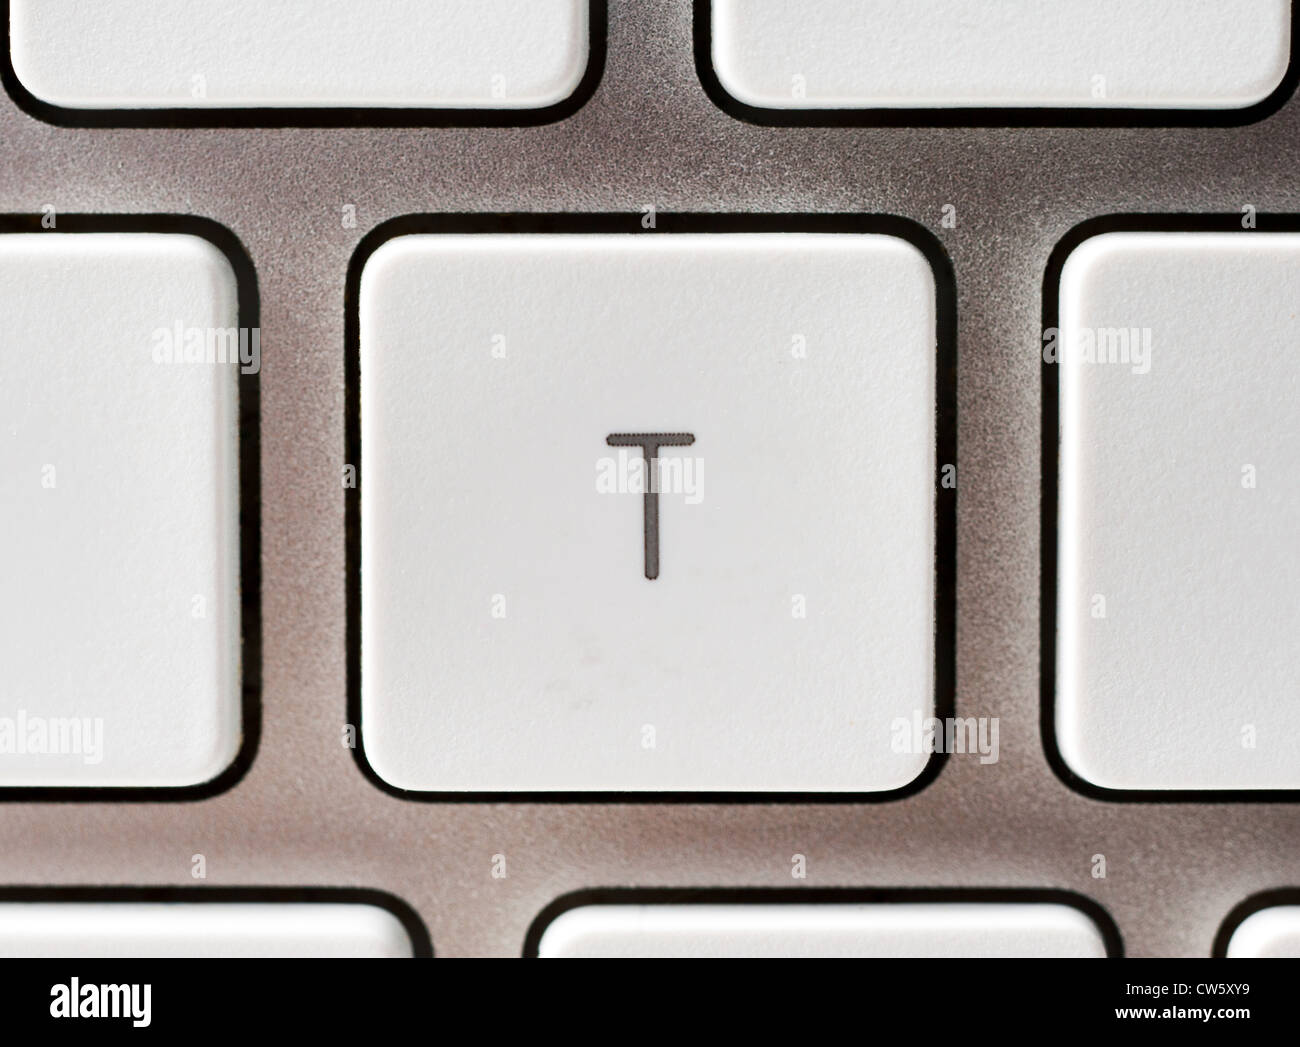 Letter T on an Apple keyboard Stock Photo